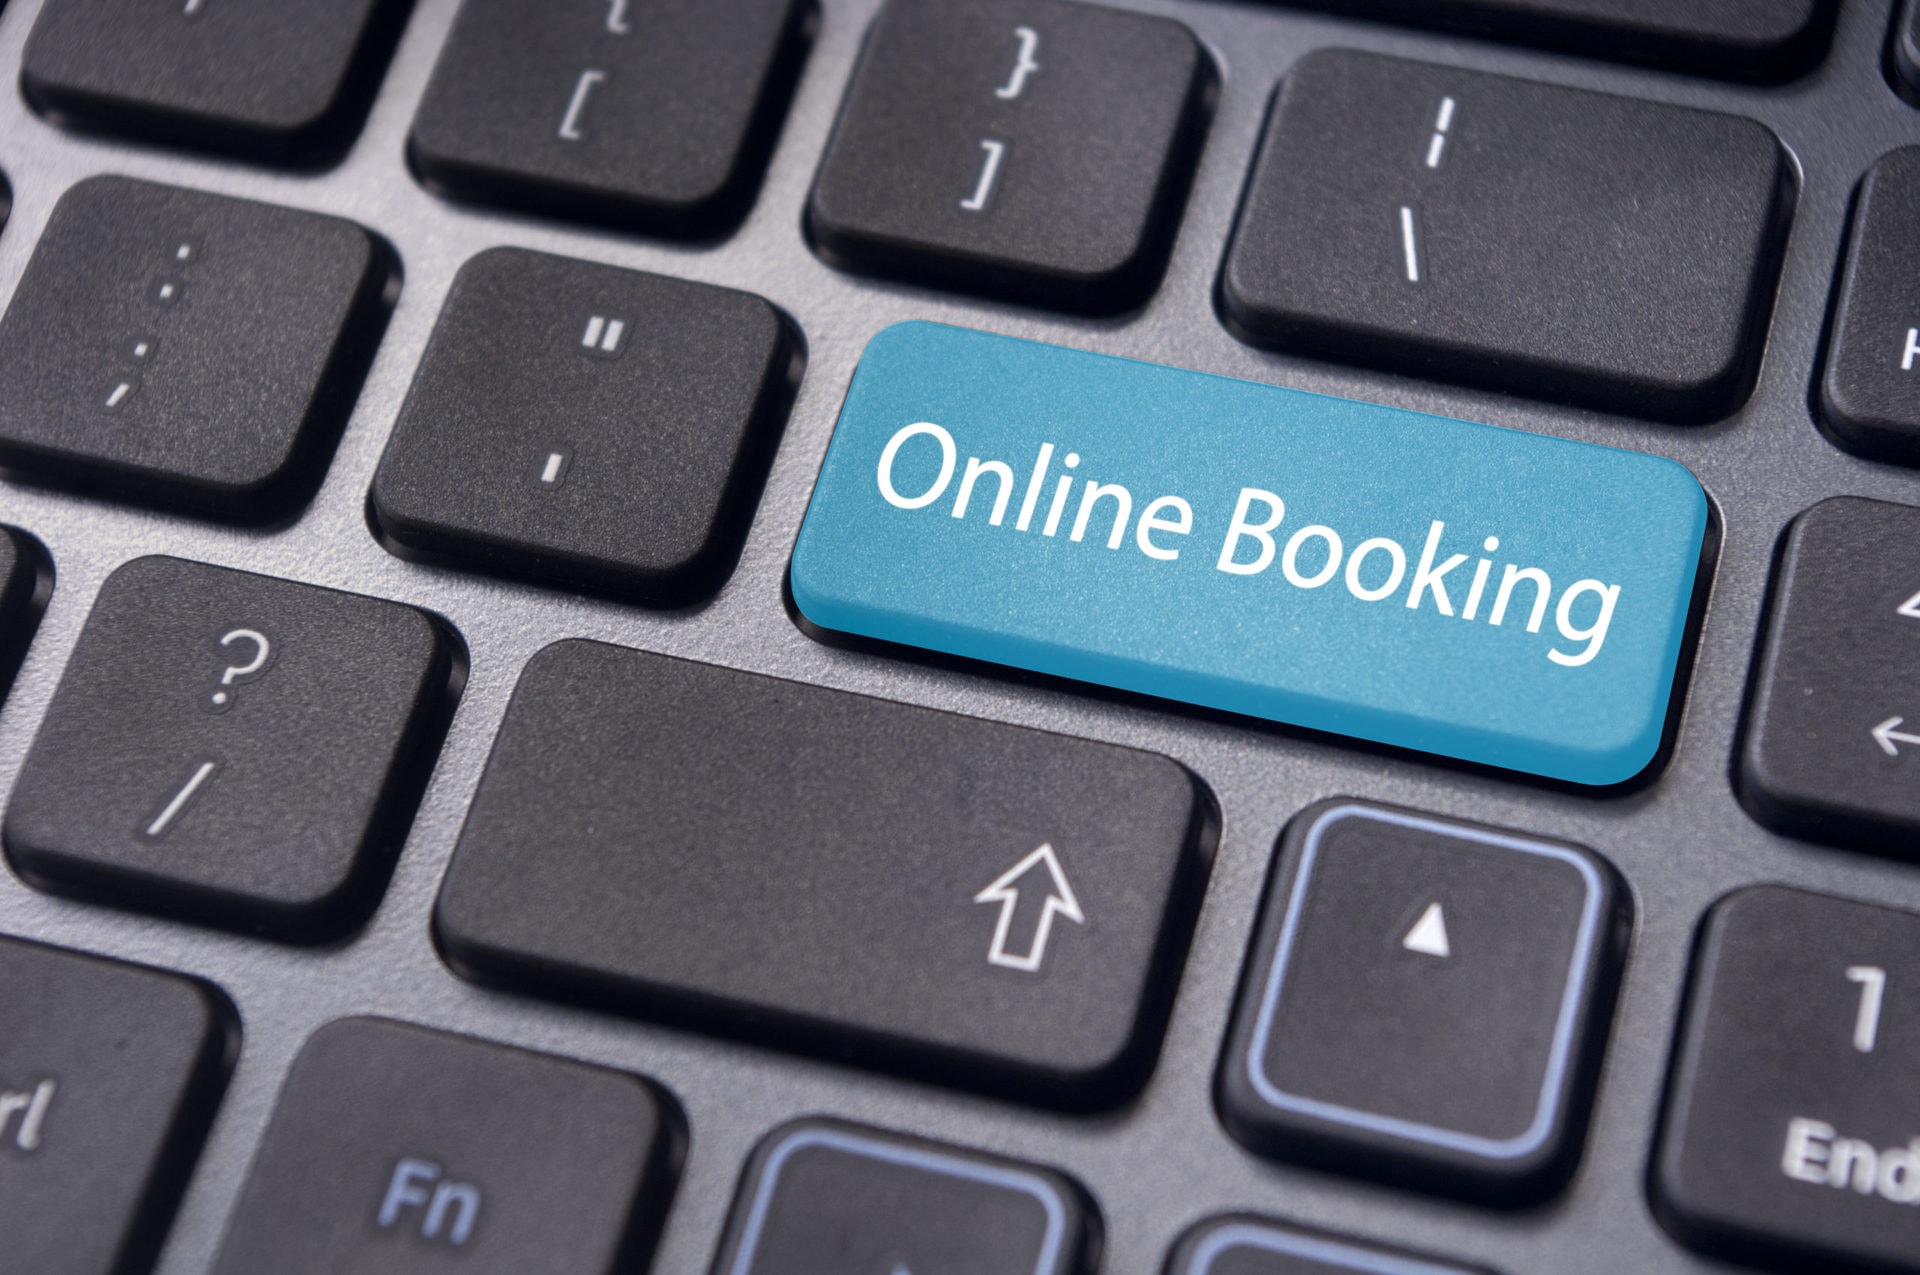 Online,Booking,Concepts,,With,Message,On,Enter,Key,Of,Computer